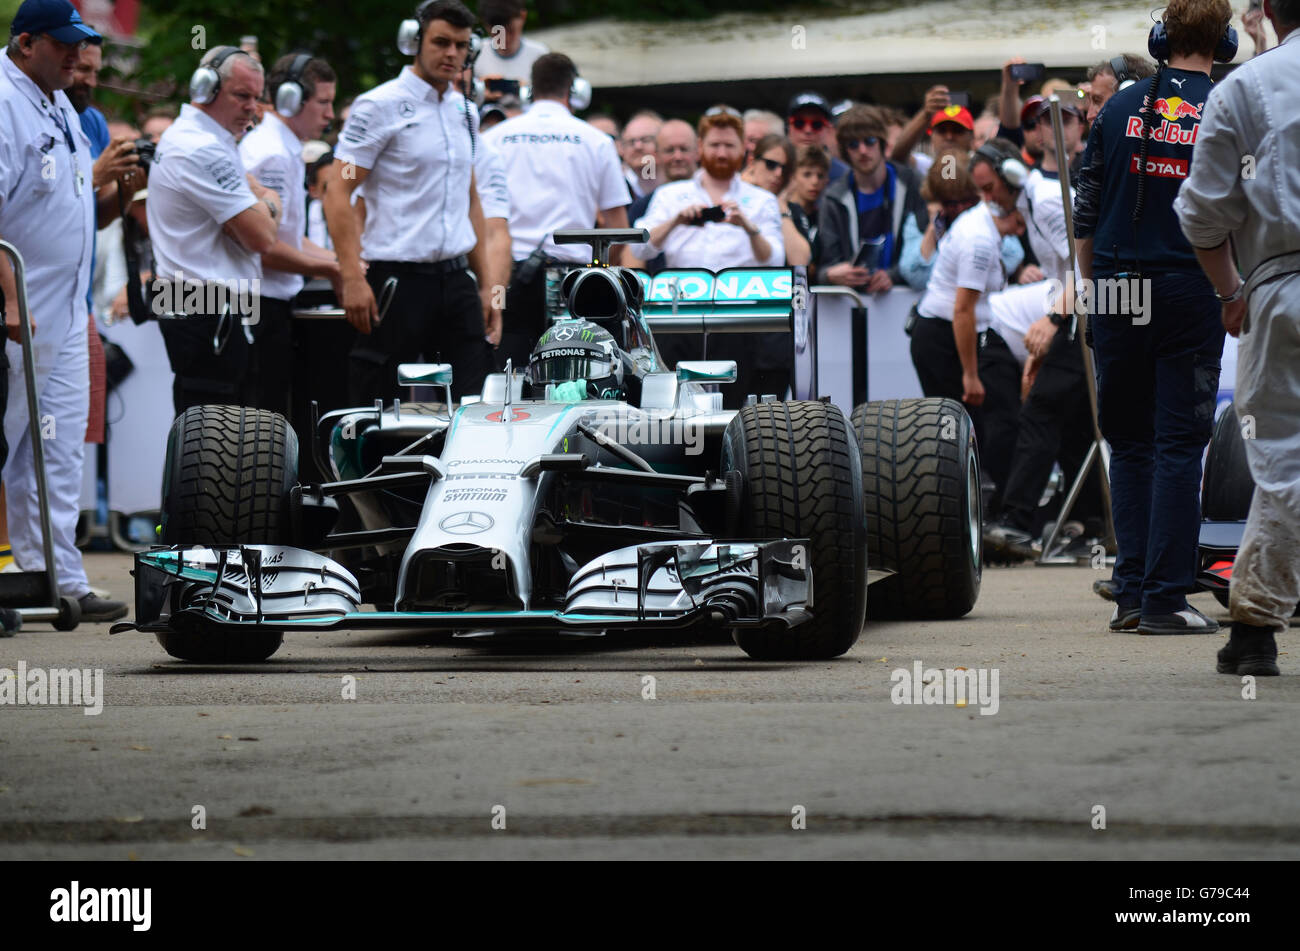 Mercedes F1 team at Goodwood Festival of Speed Stock Photo